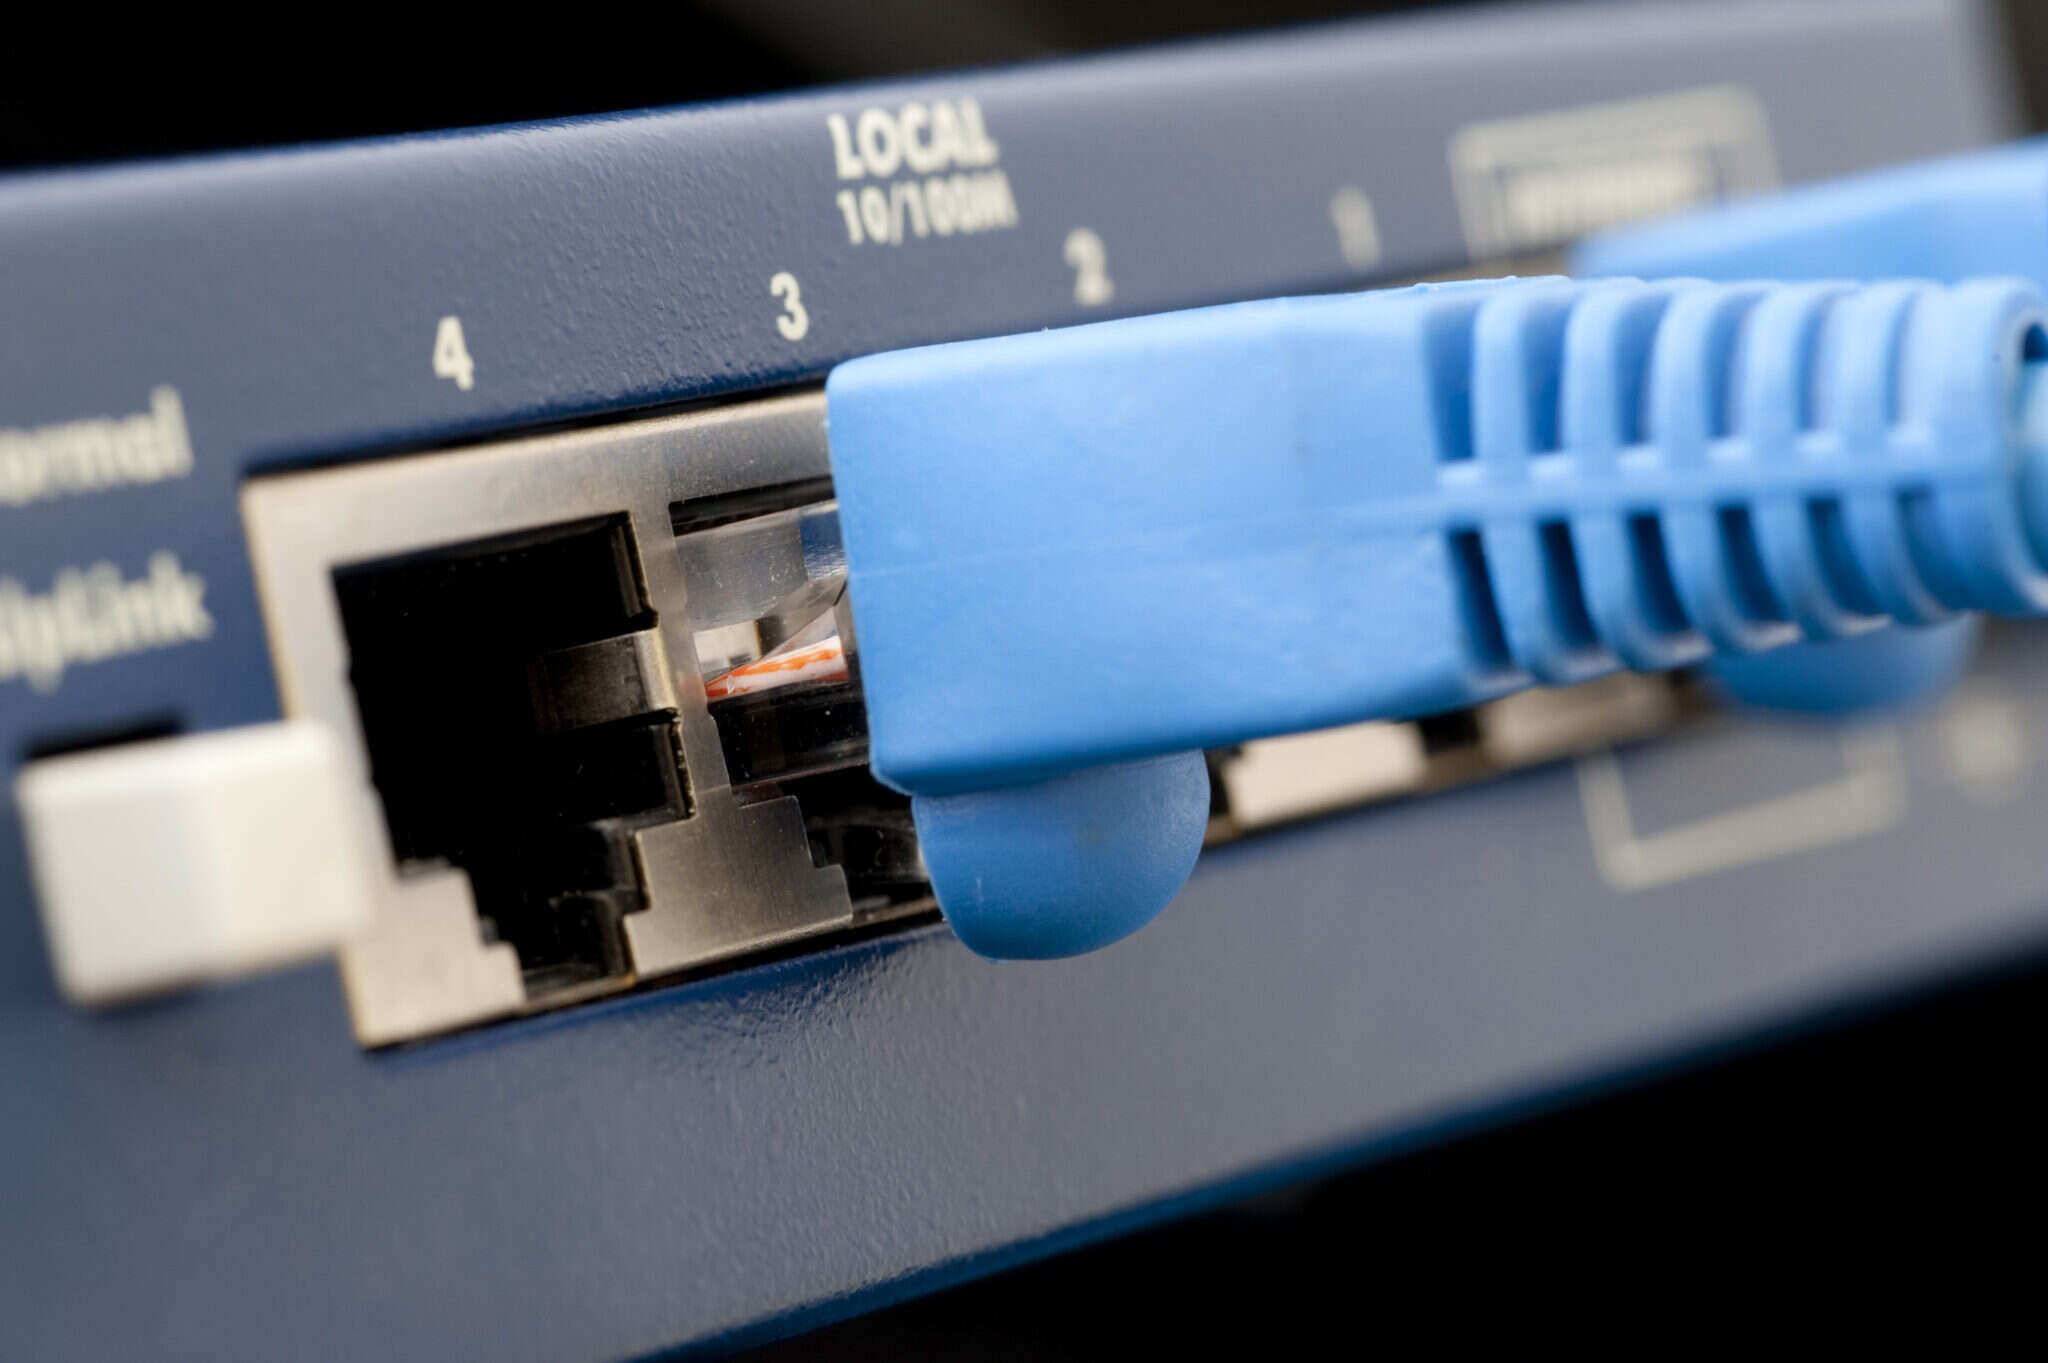 Hackers Are Attempting to Cripple Cisco Networking Kit via New 0Day